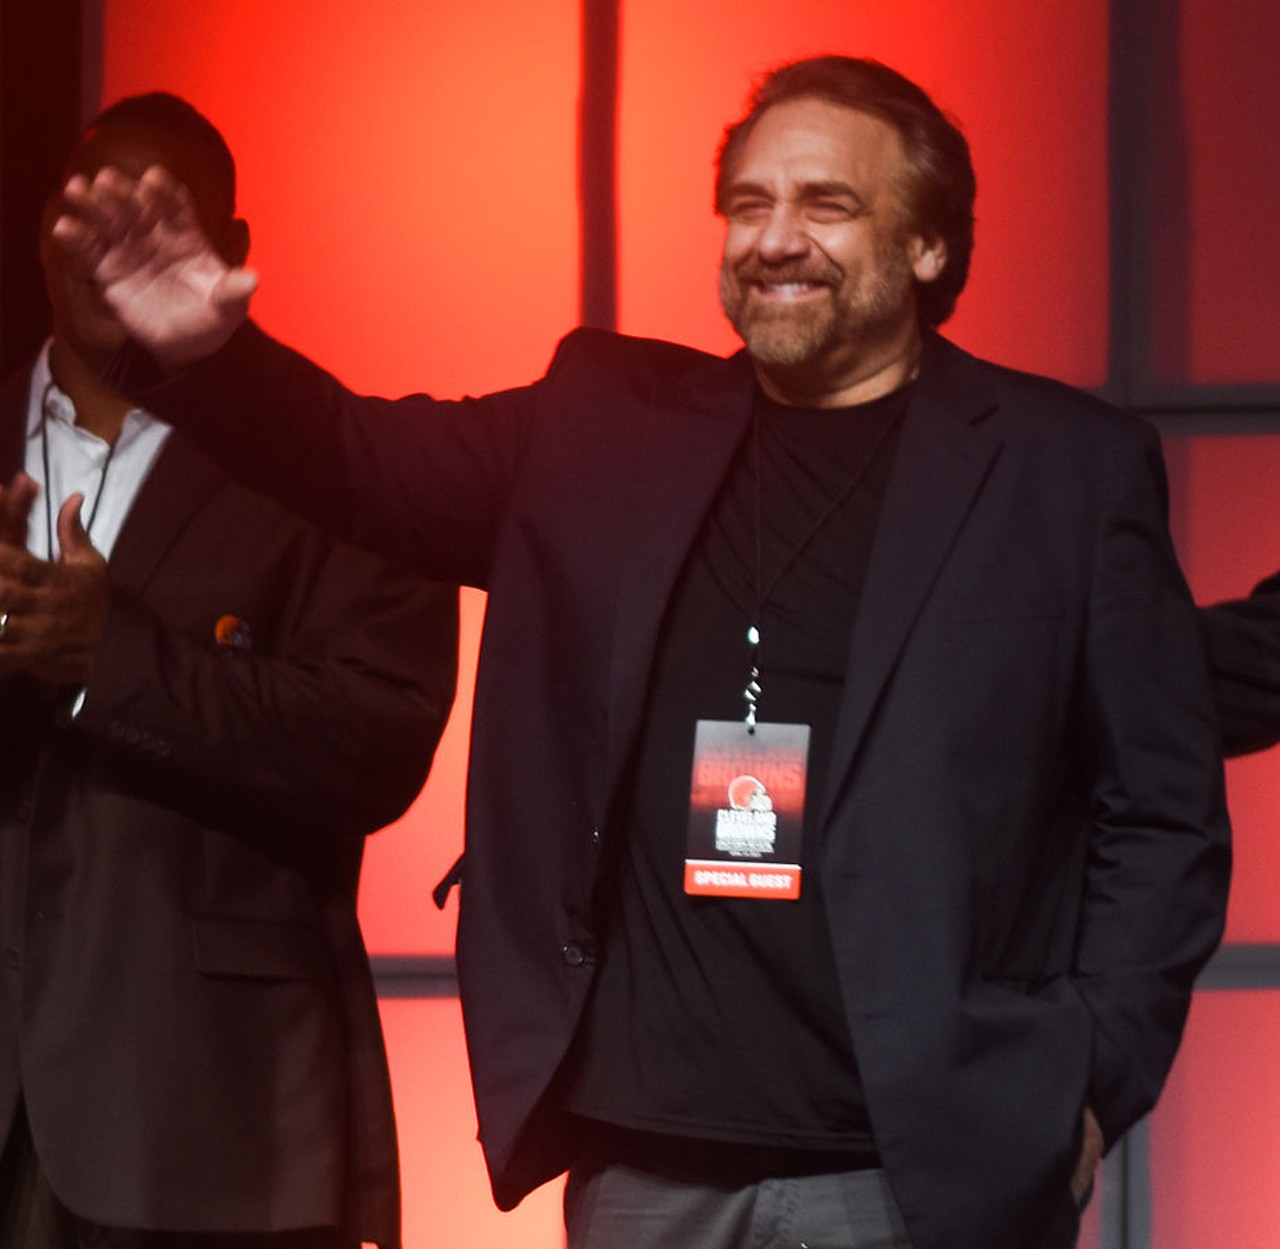 Bob Golic
St. Joseph's High School
Bob Golic was a defensive tackle for three NFL teams, including six years with the Cleveland Browns.
Photo via Erik Drost/Wikimedia Commons